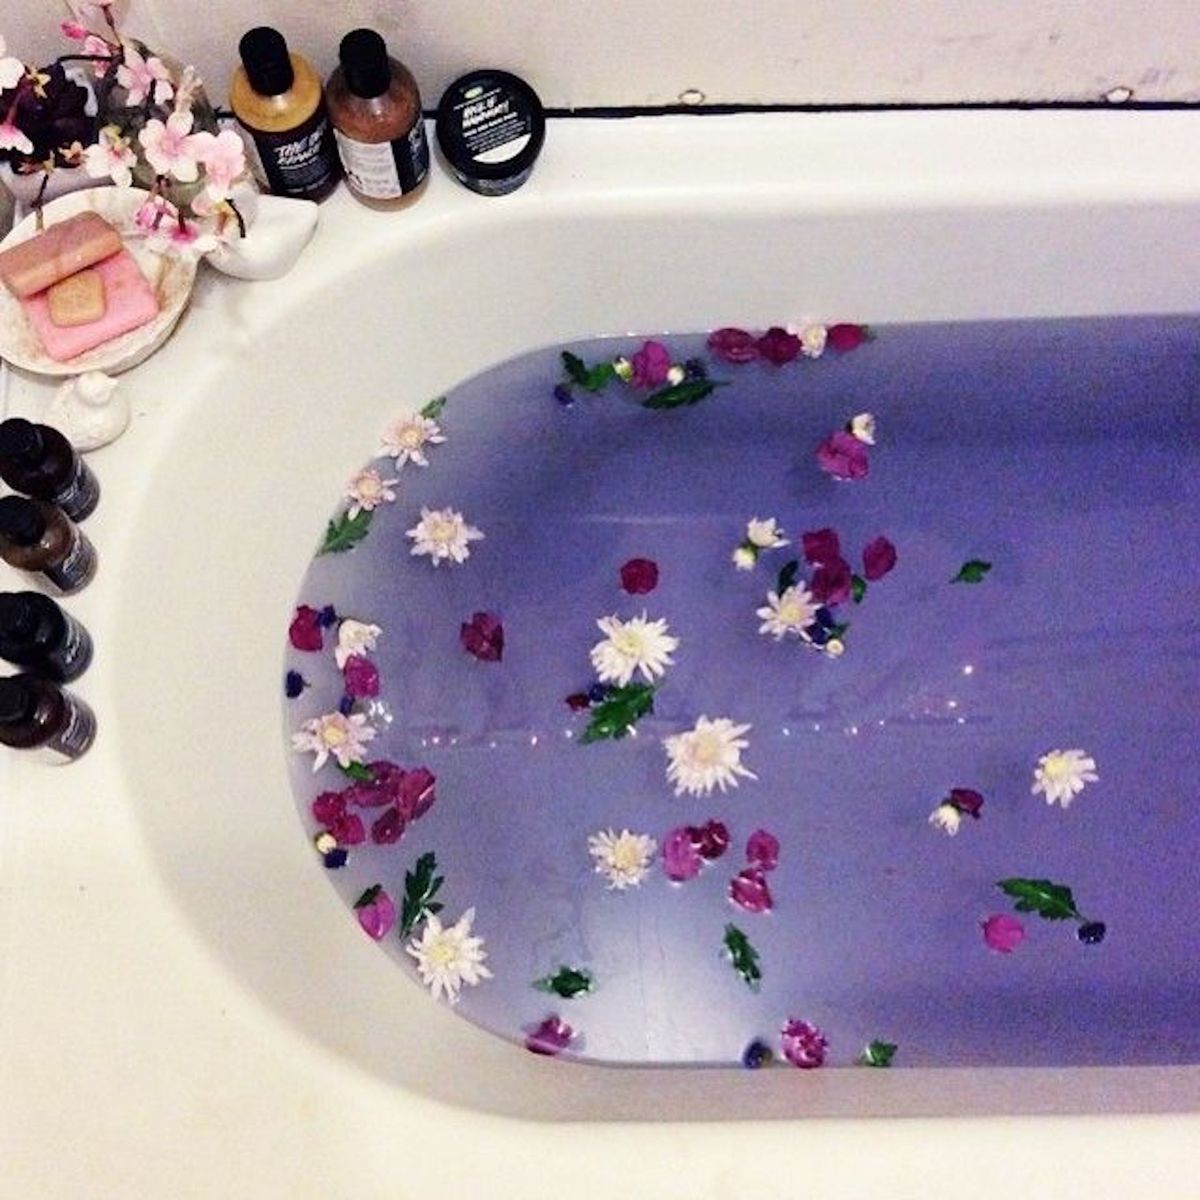 7 Reasons That Baths Are Important Part Of Some College Girls' Lives